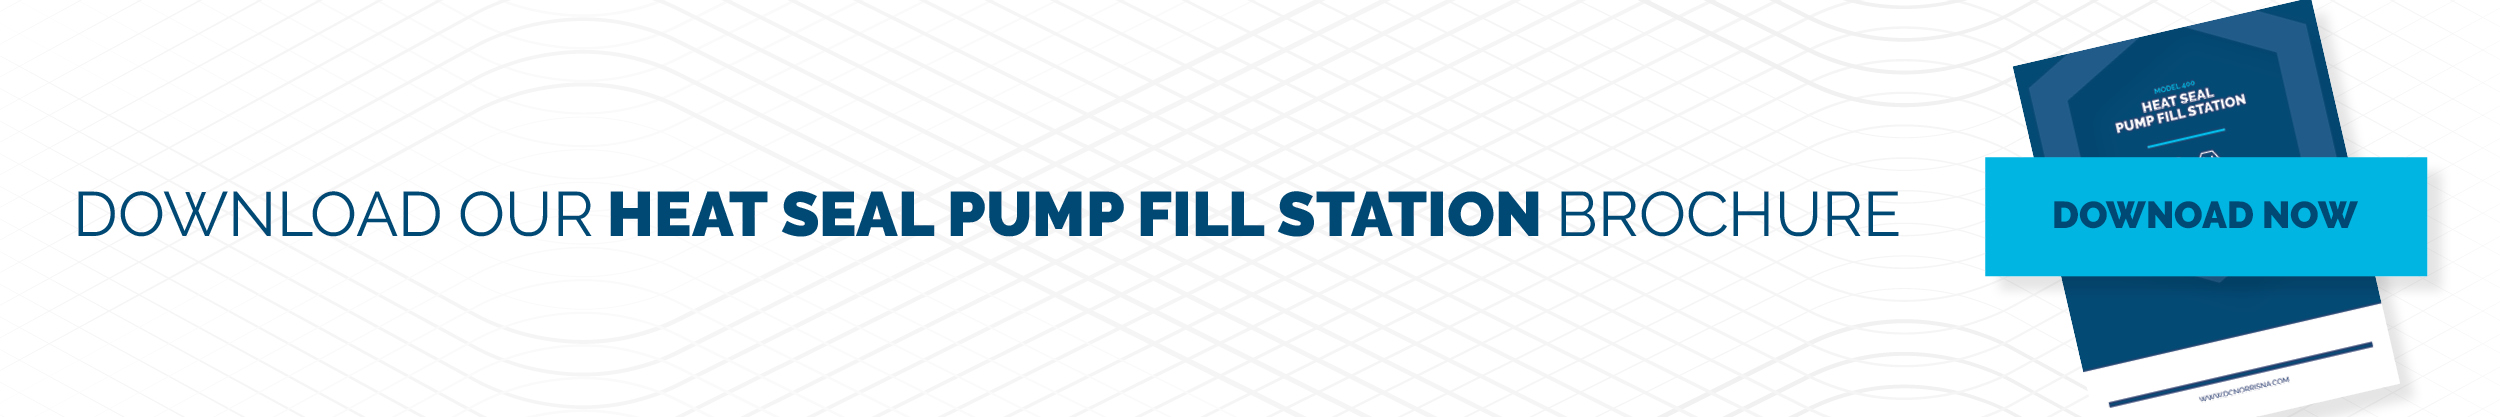 download the DC Norris North America Heat Seal Pump Fill Station